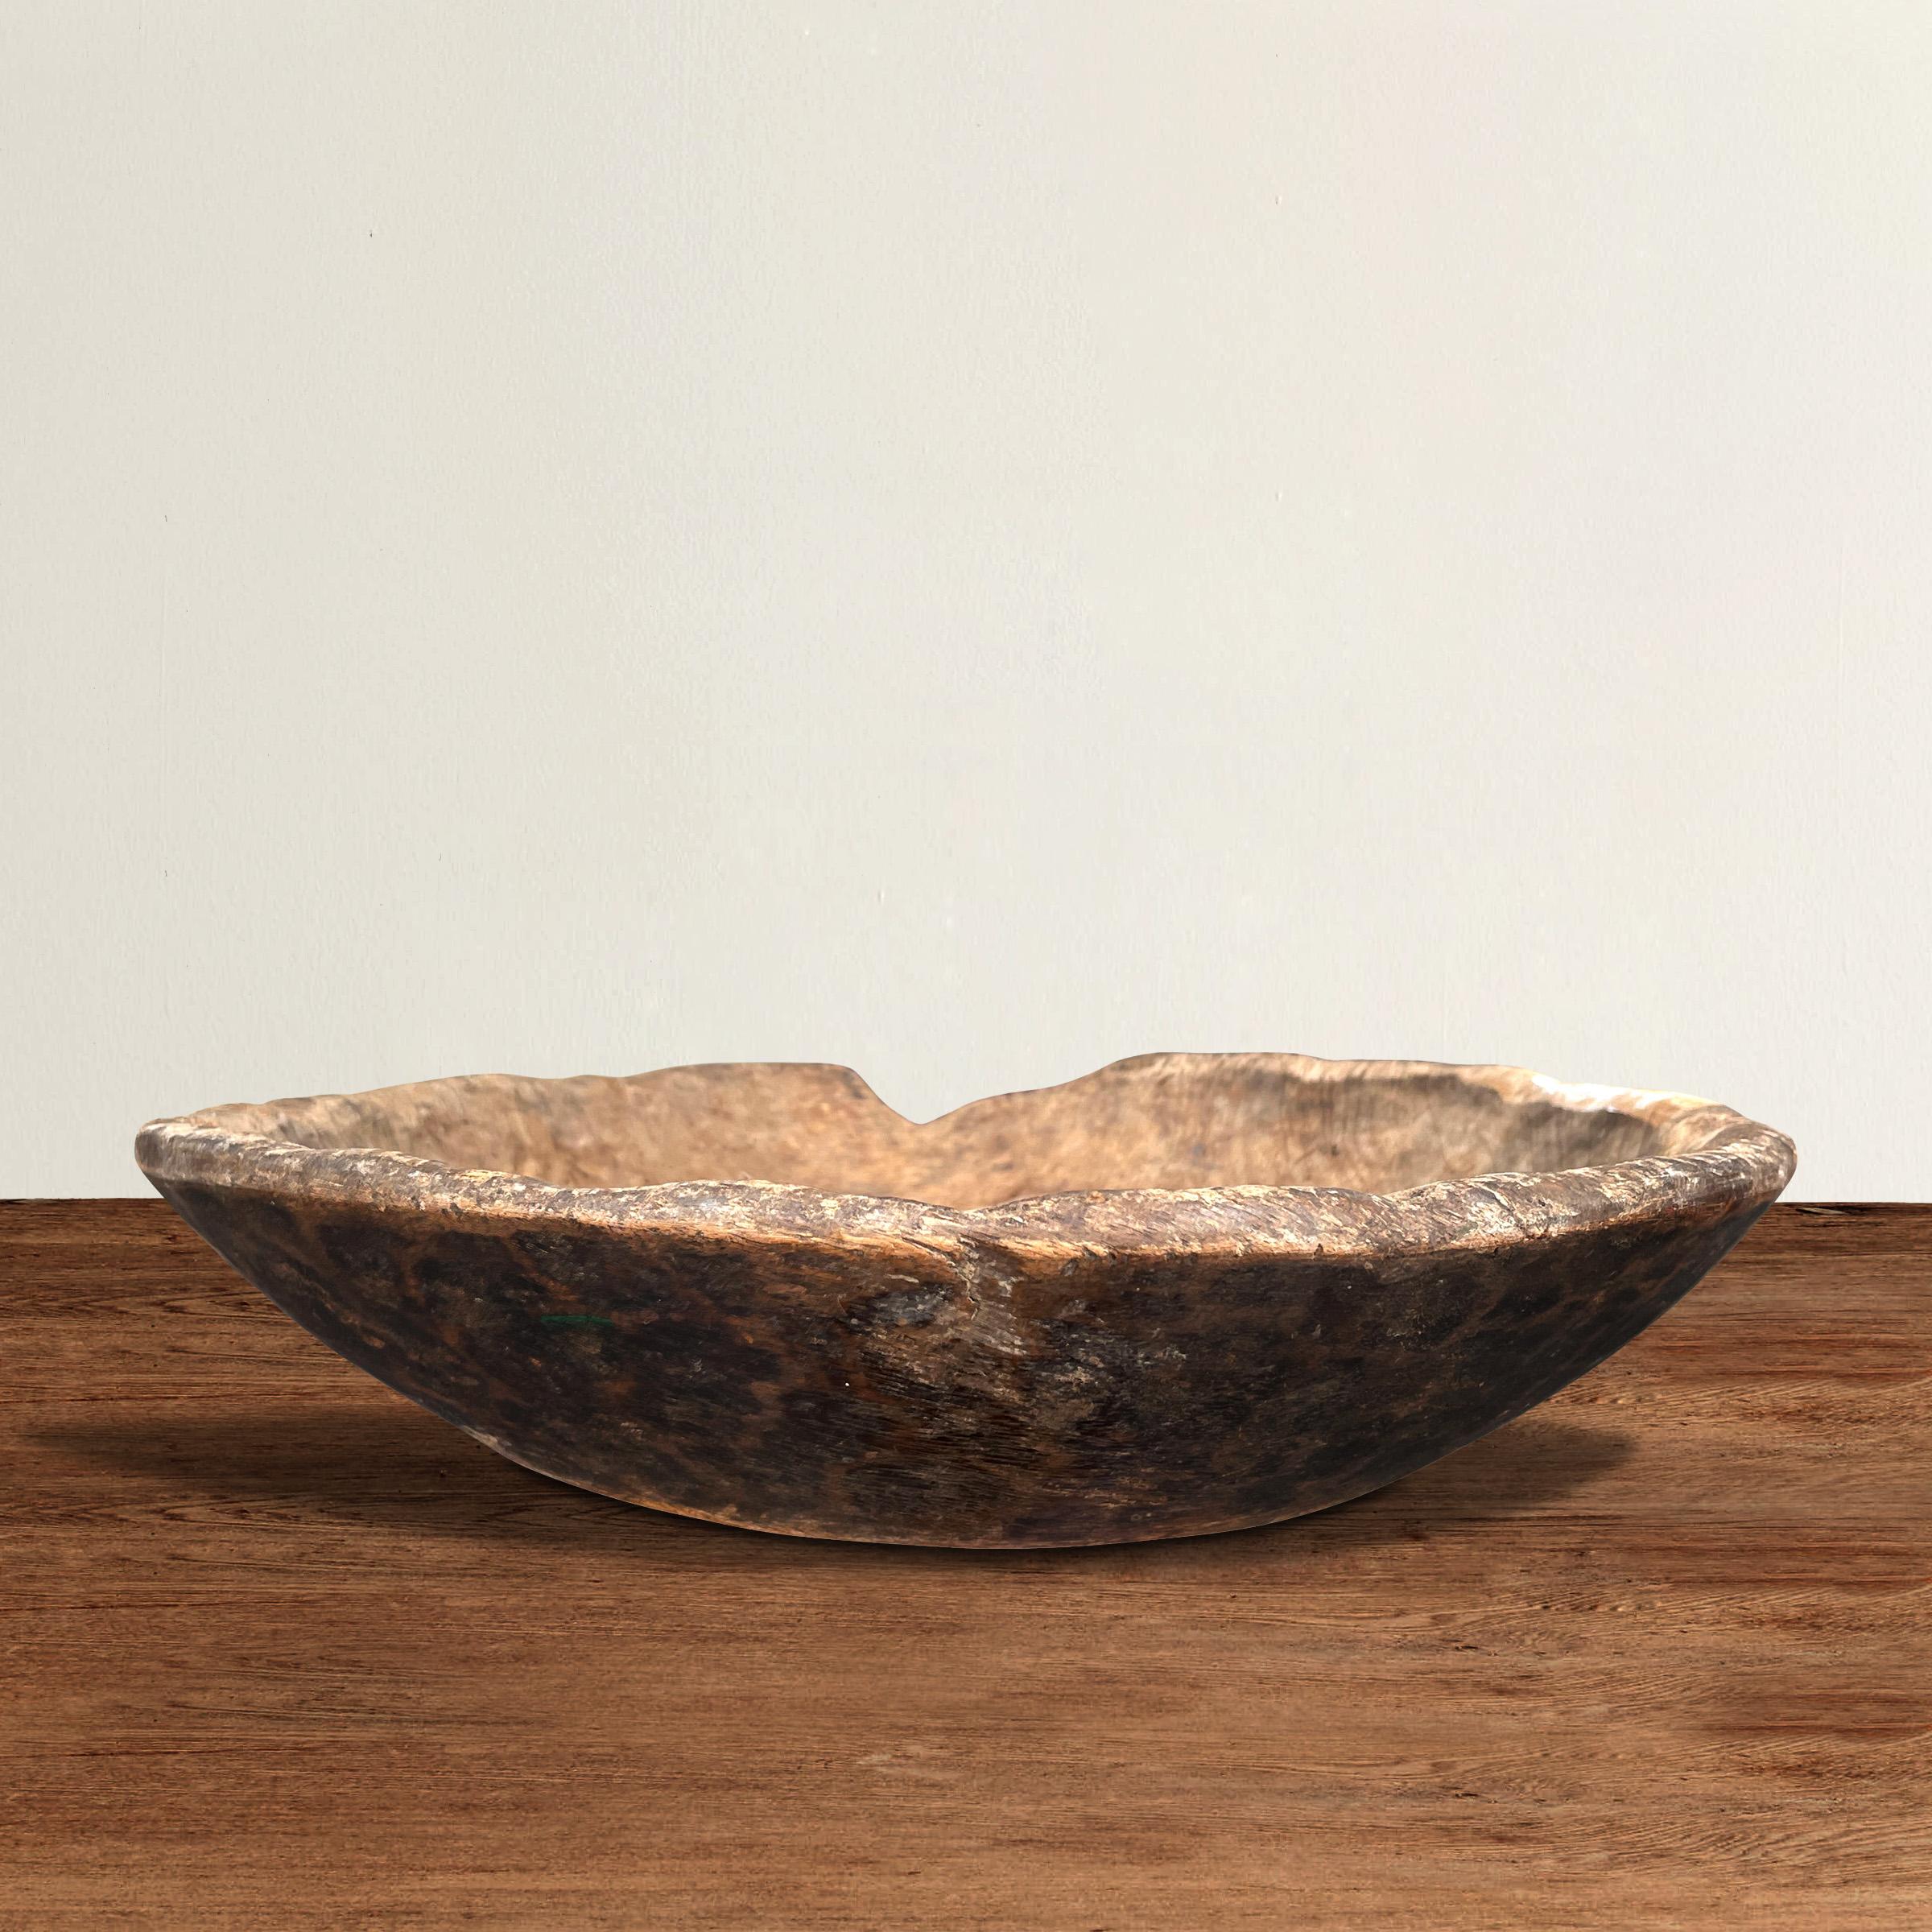 A wonderful 19th century American carved wood bowl or platter with a beautiful hand-hewn exterior, and with a beautiful patina only time can bestow.